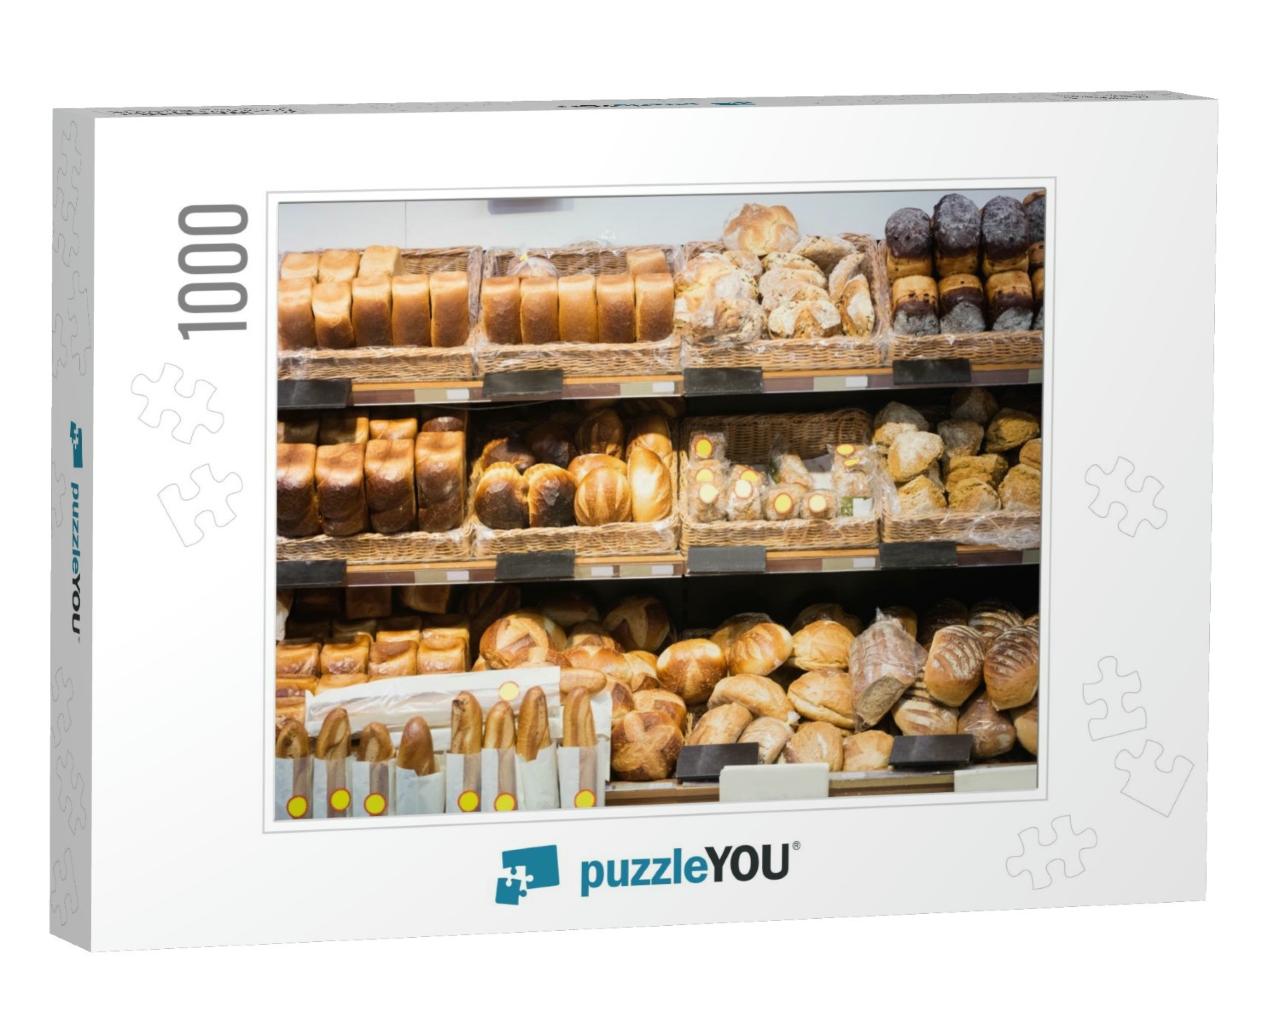 Focus on Shelves with Bread in a Supermarket... Jigsaw Puzzle with 1000 pieces